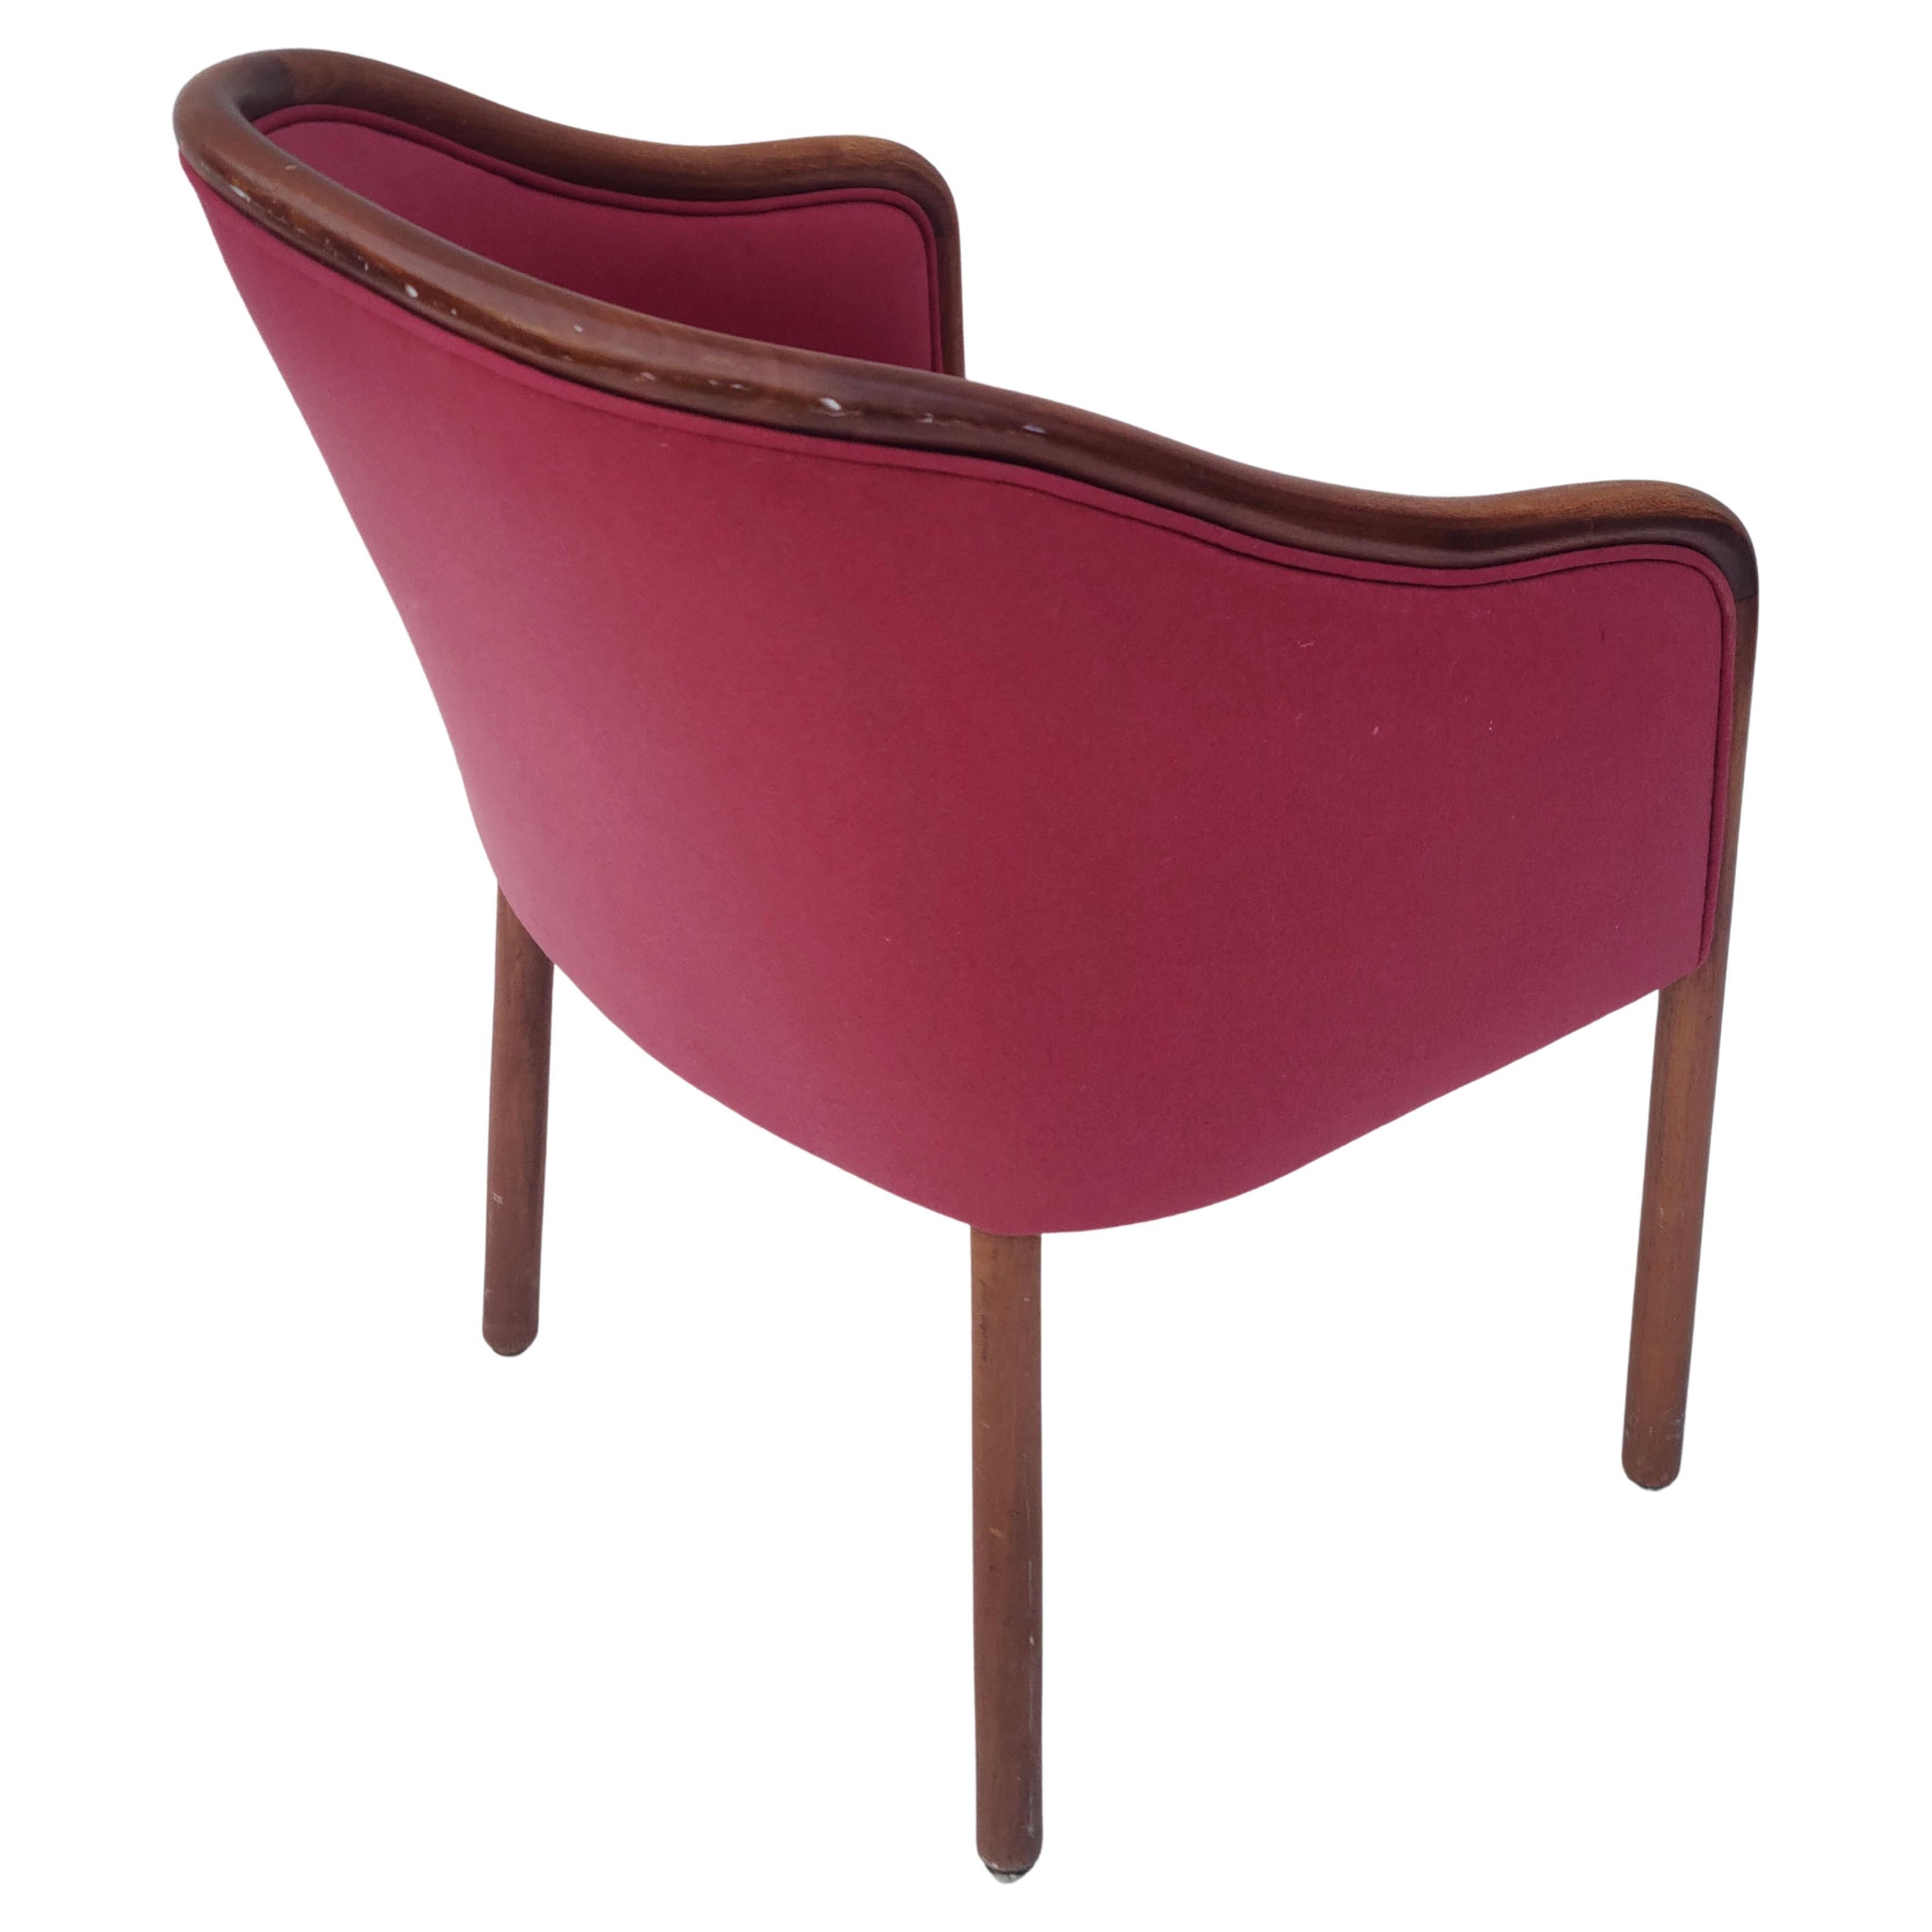 Please feel free to reach out for accurate shipping to your location.

Sculpted Walnut Armchair.
Designed by Ward Bennett for Brickel Associates.
Rose fabric appears to be original.
